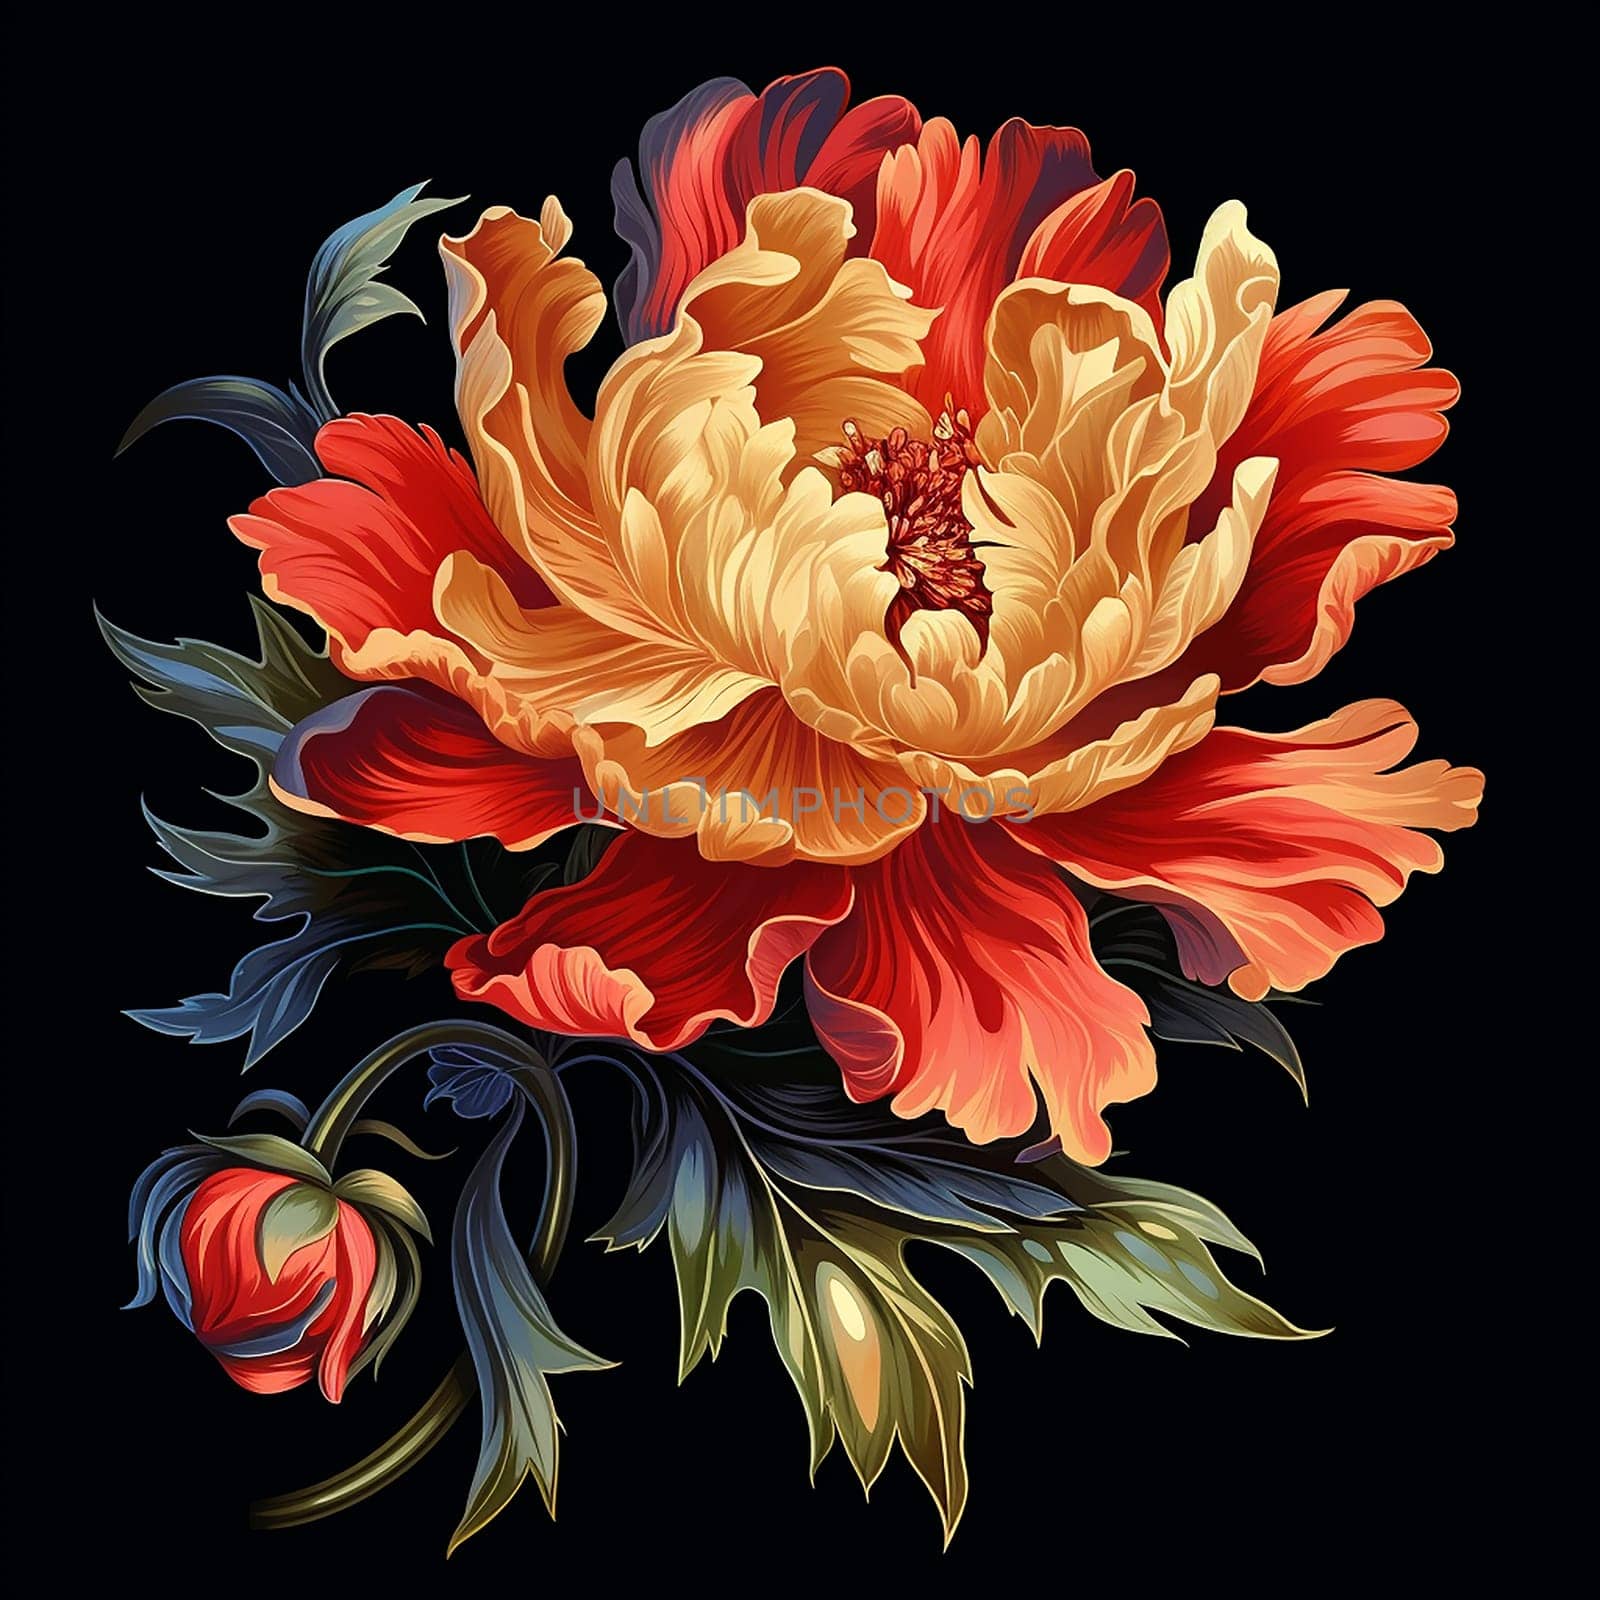 Vibrant digital artwork of a blooming red and orange flower with dark background.